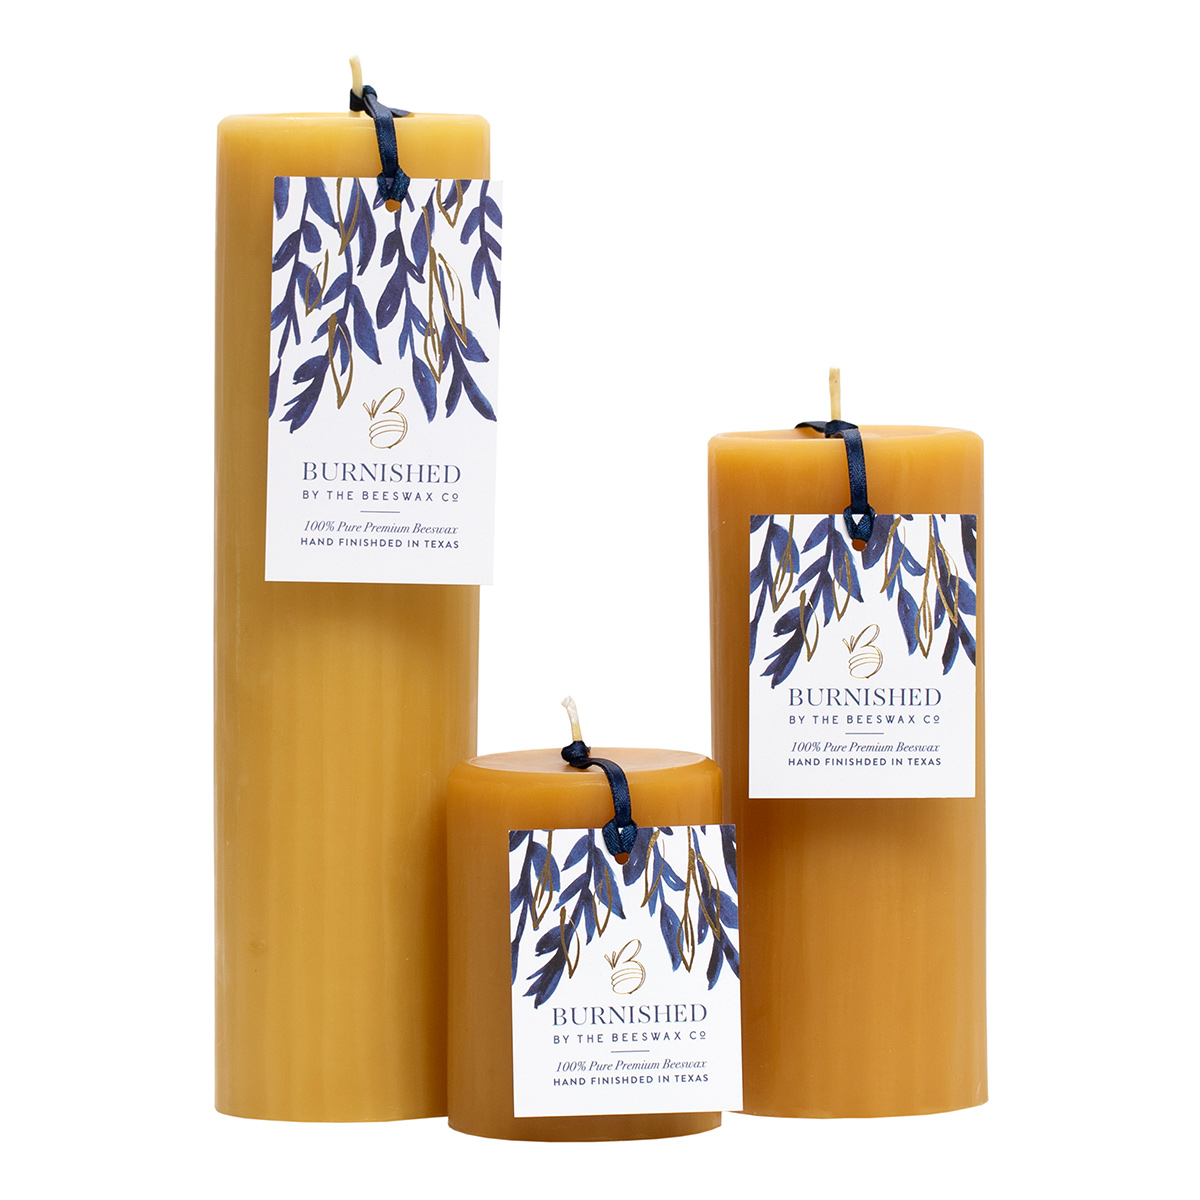 The Beeswax Co Pure Texas Beeswax Block - Ultra Clean - Naturally Filtered  & Honey Scented - Premium Food Grade Yellow Beeswax for Candles, Butcher